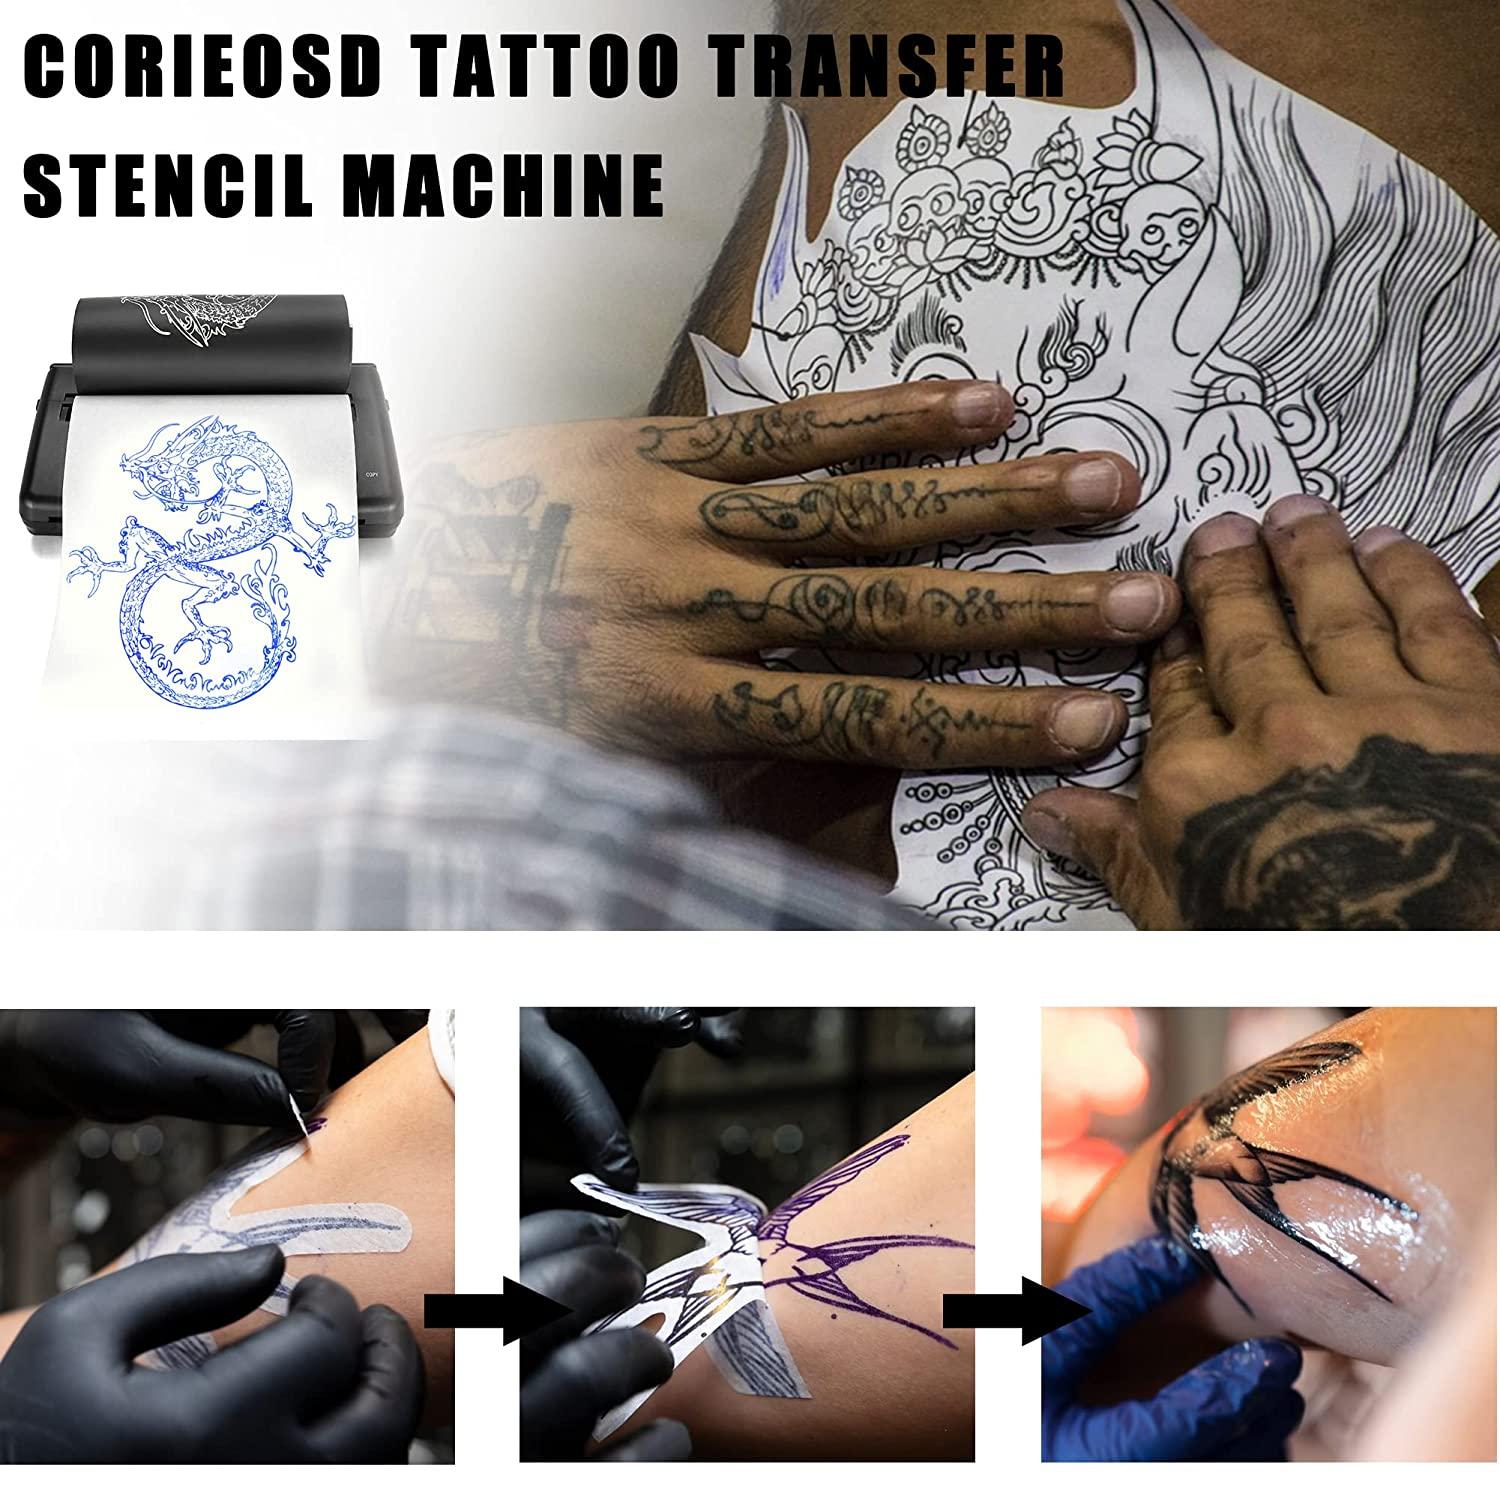 25 Sheets 8 1/2 x 11 Professional tattoo stencil transfer paper, A4 Paper  Size, Used by tattooists to transfer your designs on to the skin